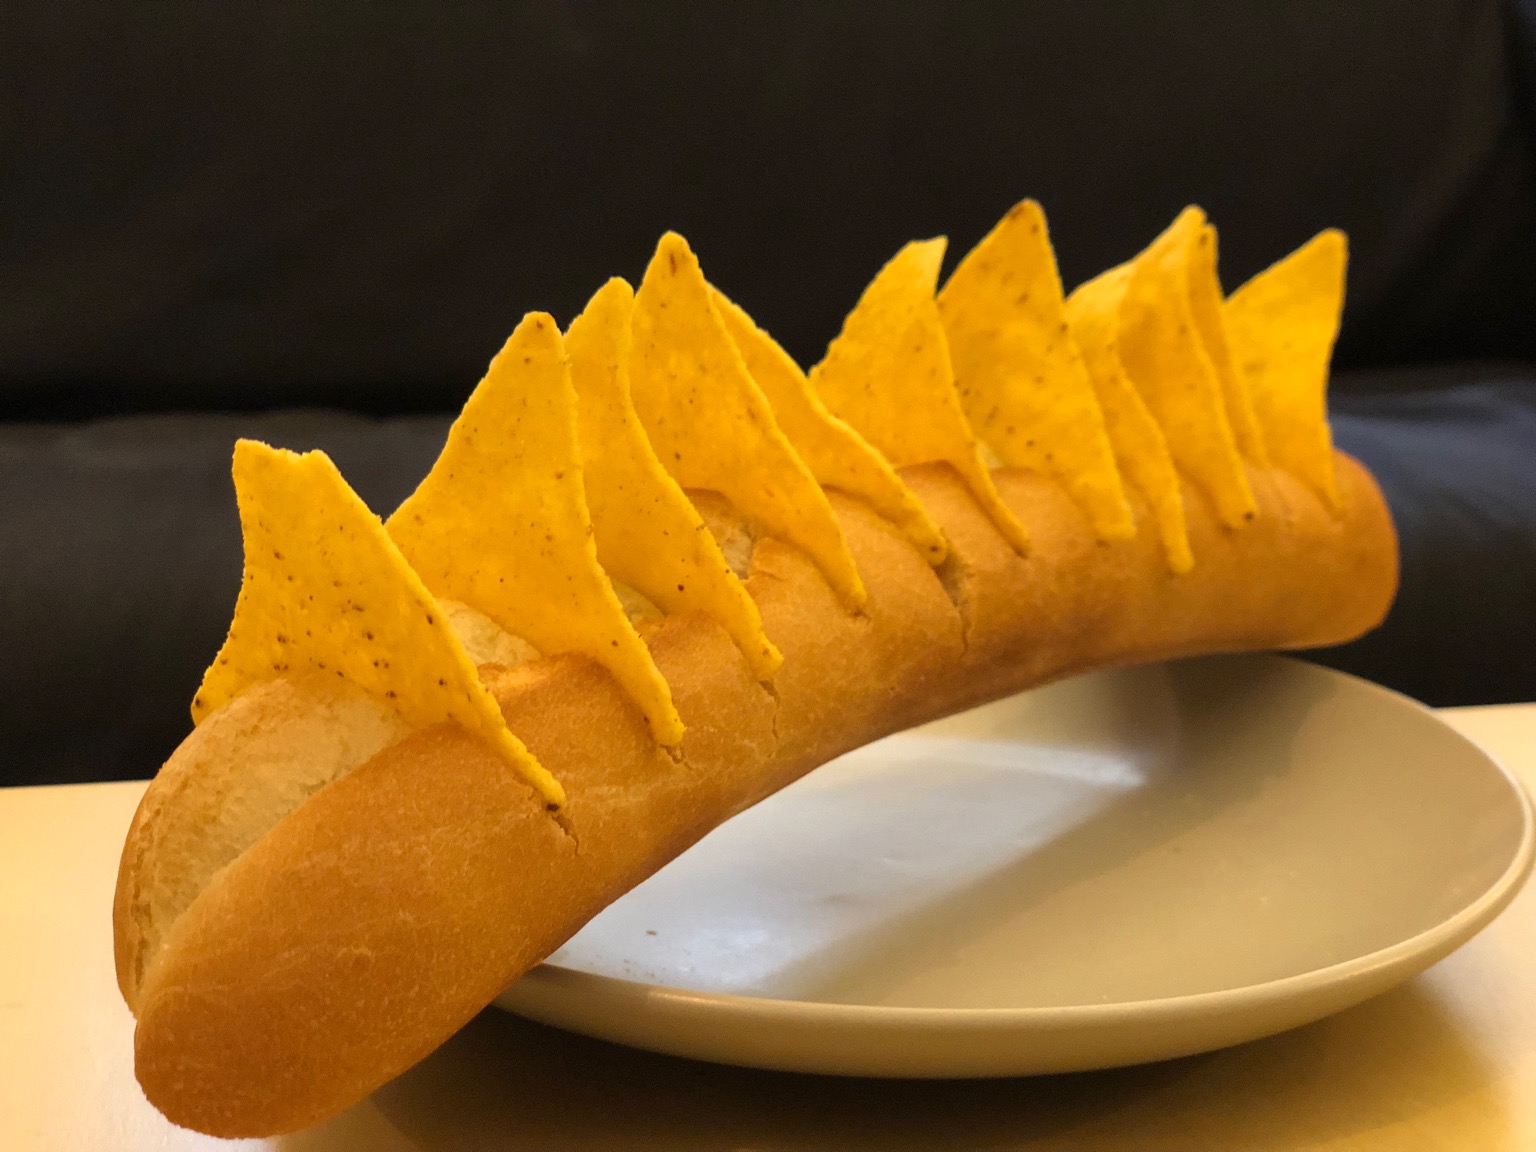 Doritos slotted in along a baguette